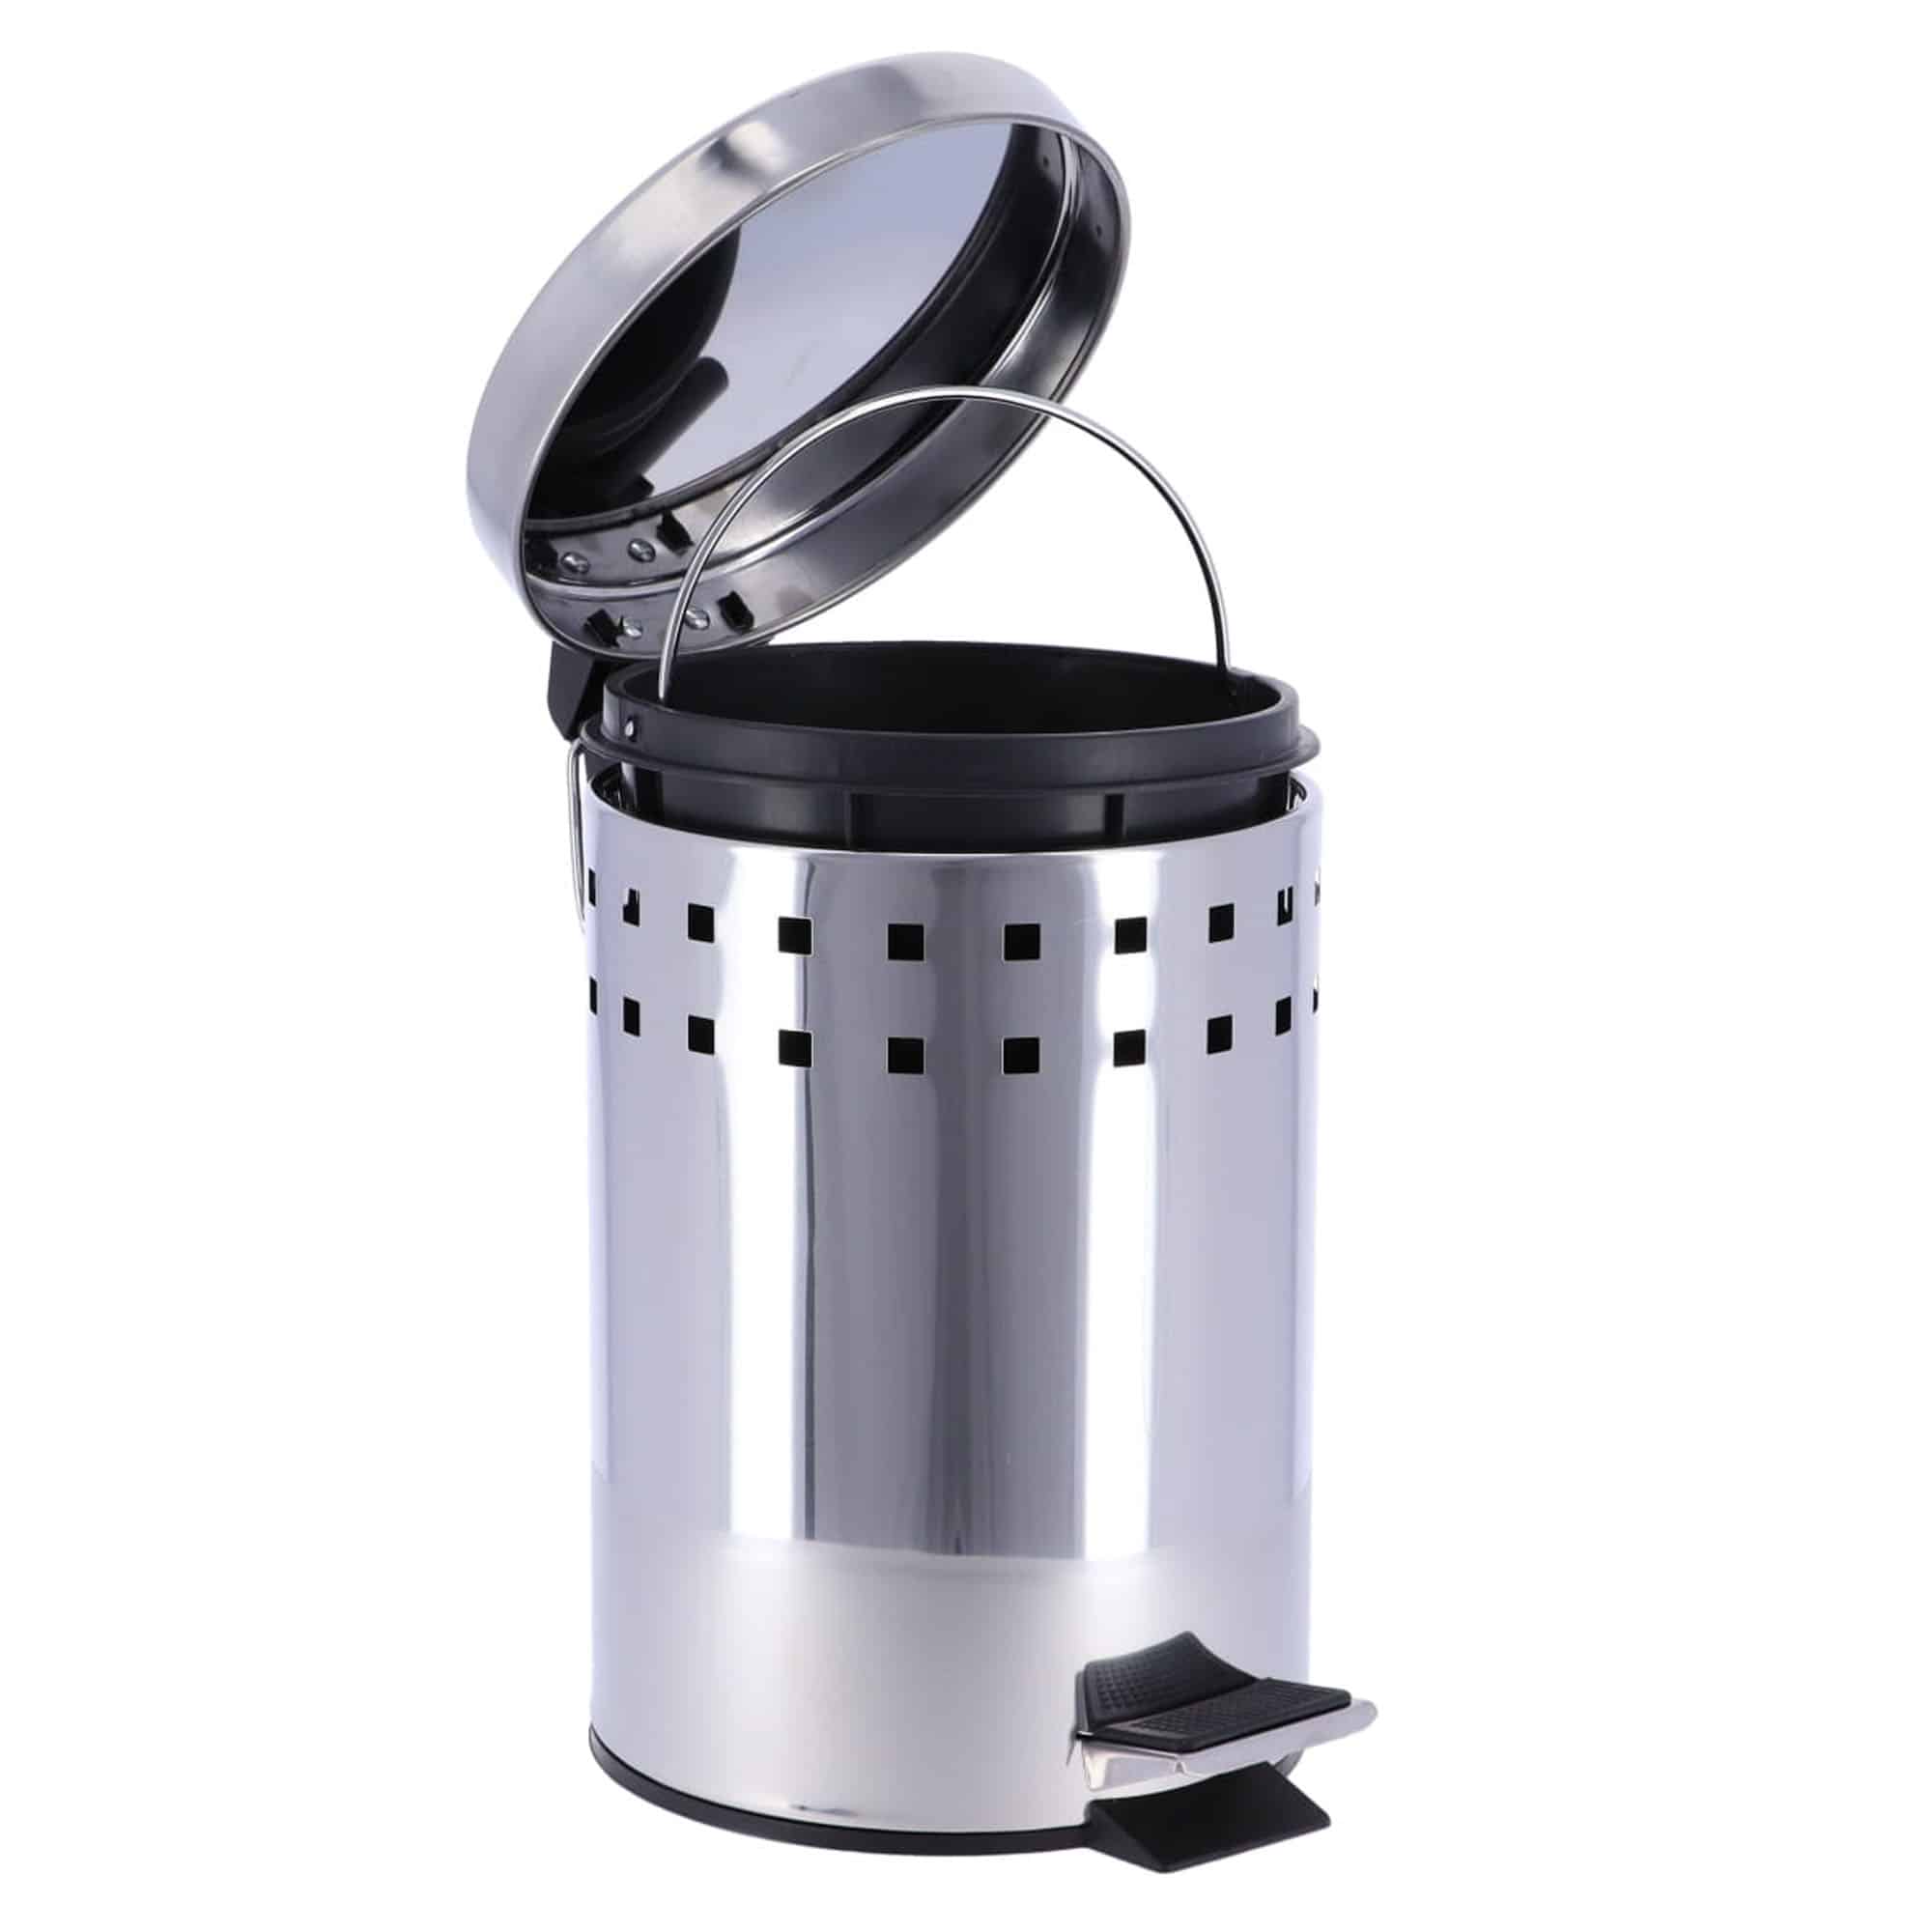 https://evideco.com/wp-content/uploads/2018/09/6502102-Chrome-Round-Metal-Small-Step-Trash-Can-with-Lid-Waste-Bin-3-liters-0.8-gal-2.jpg